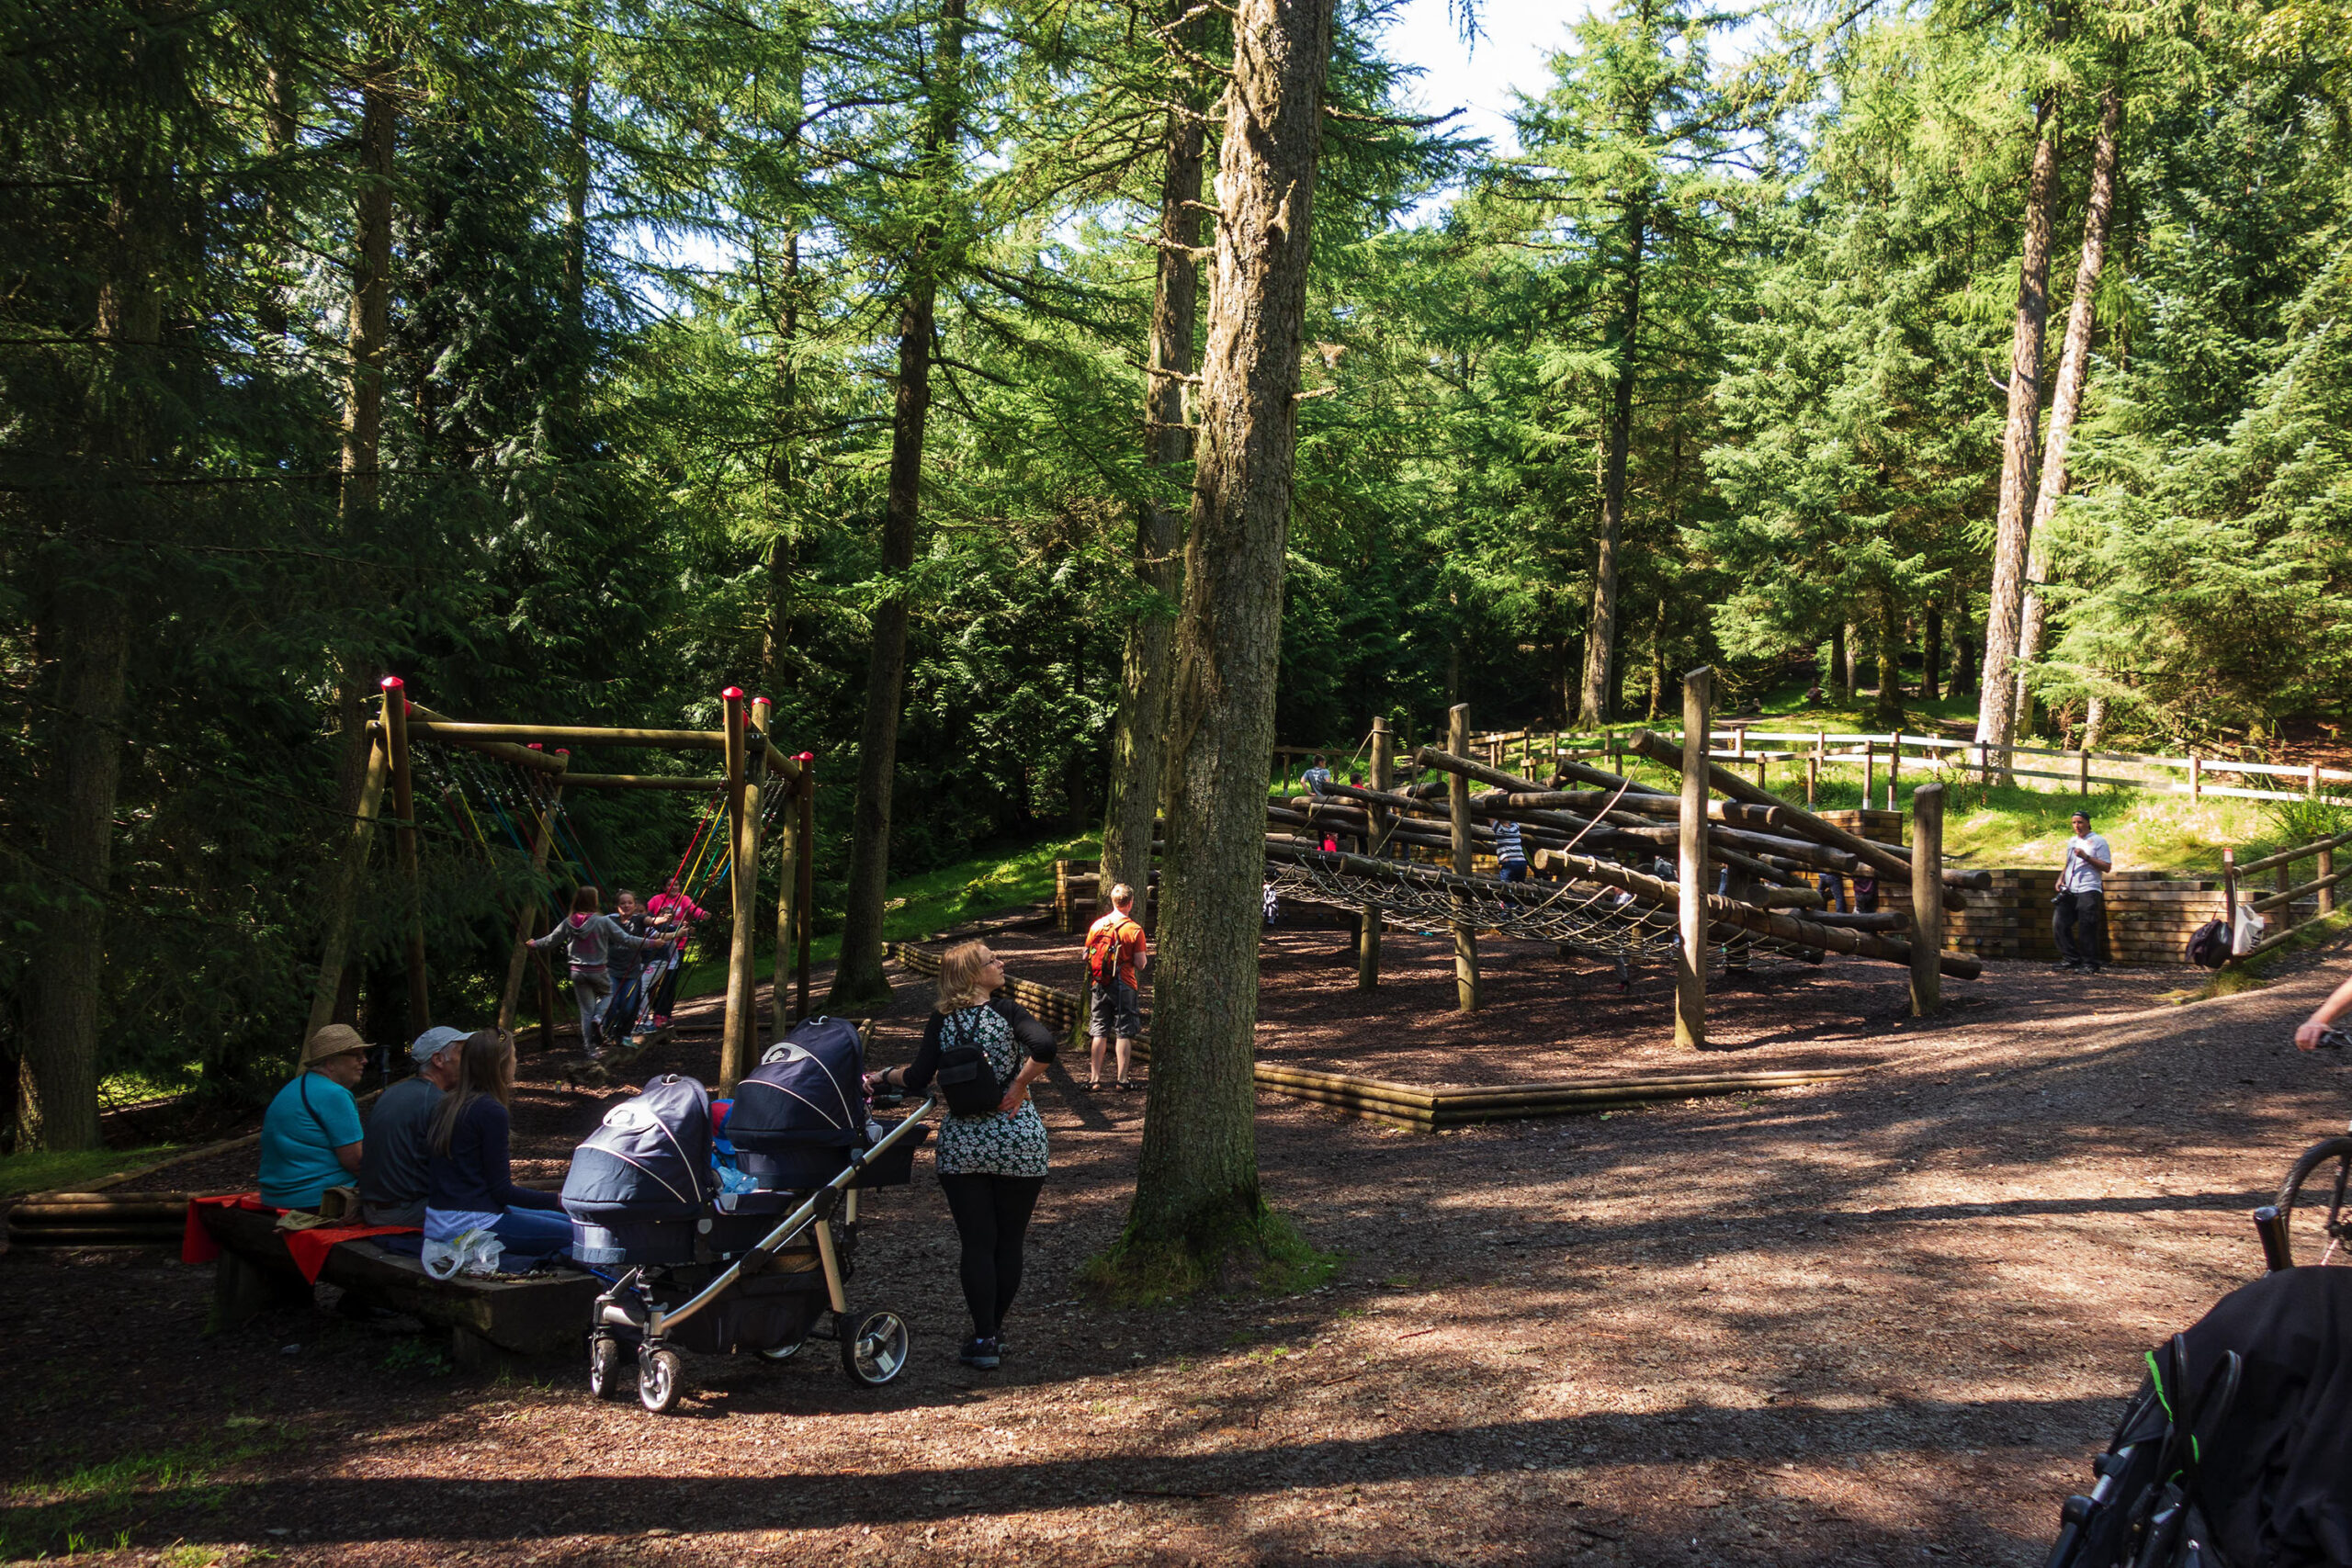 Whinlatter active play